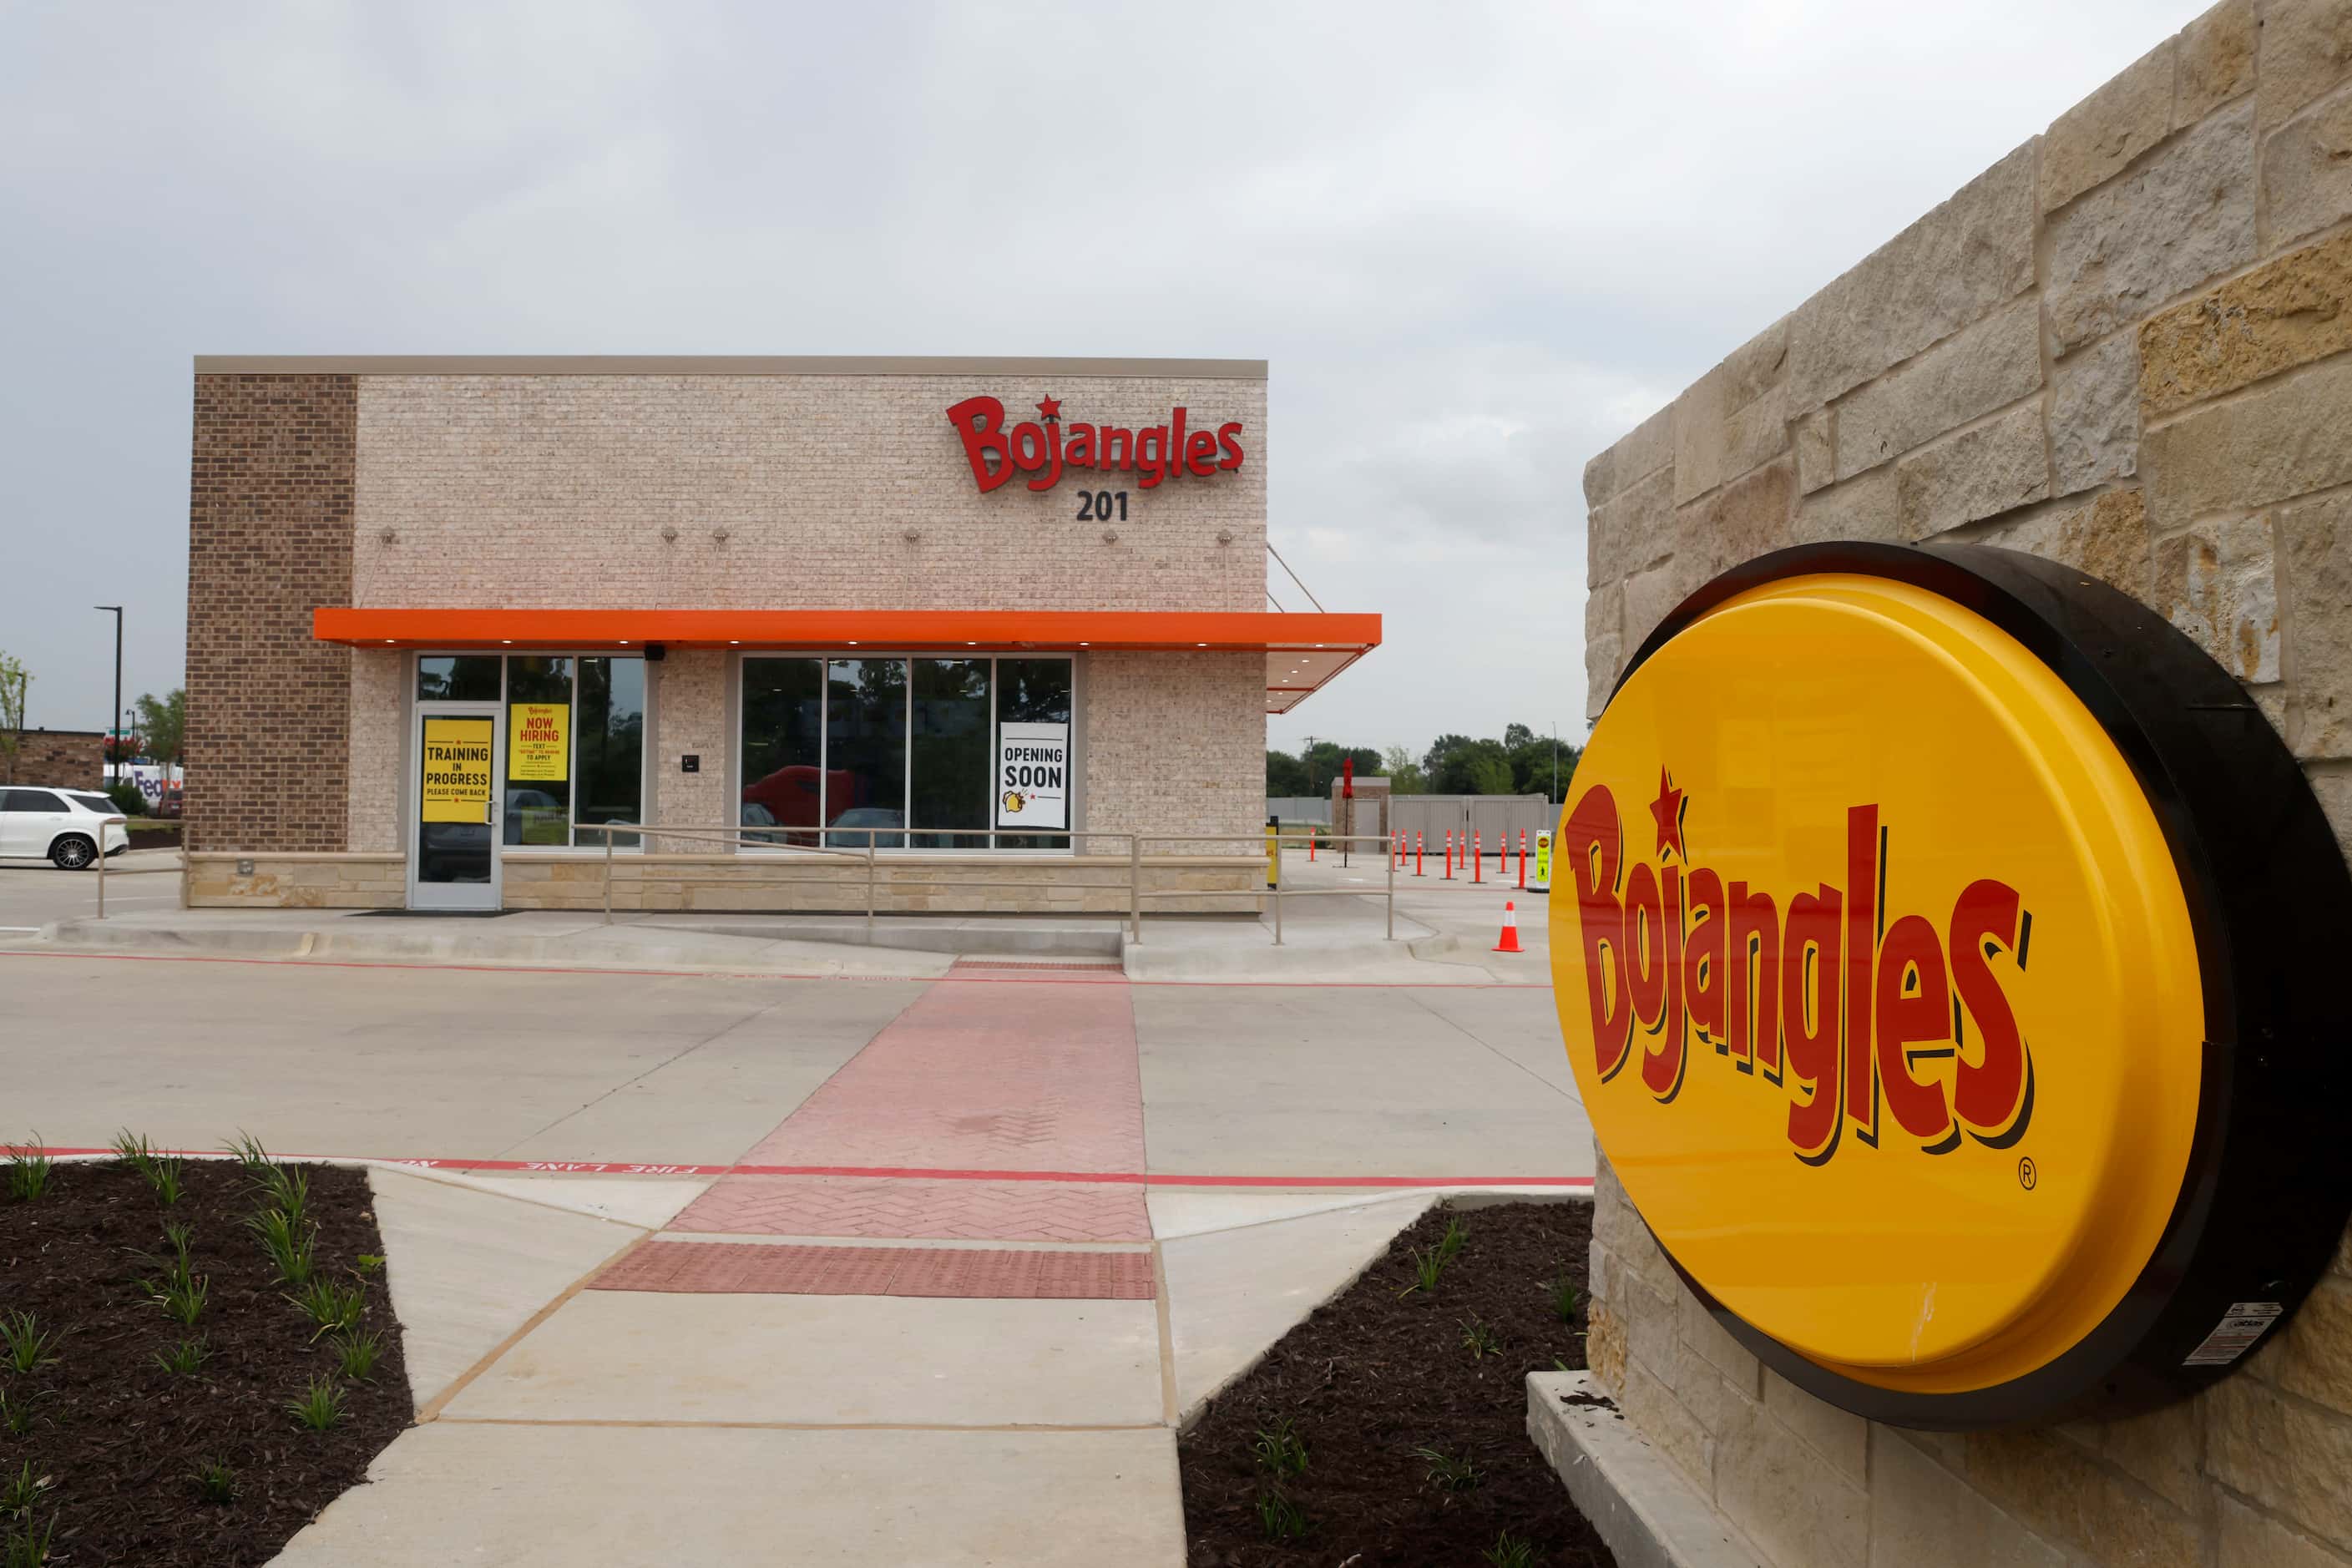 The Bojangles store in Euless has a double drive-through lane.